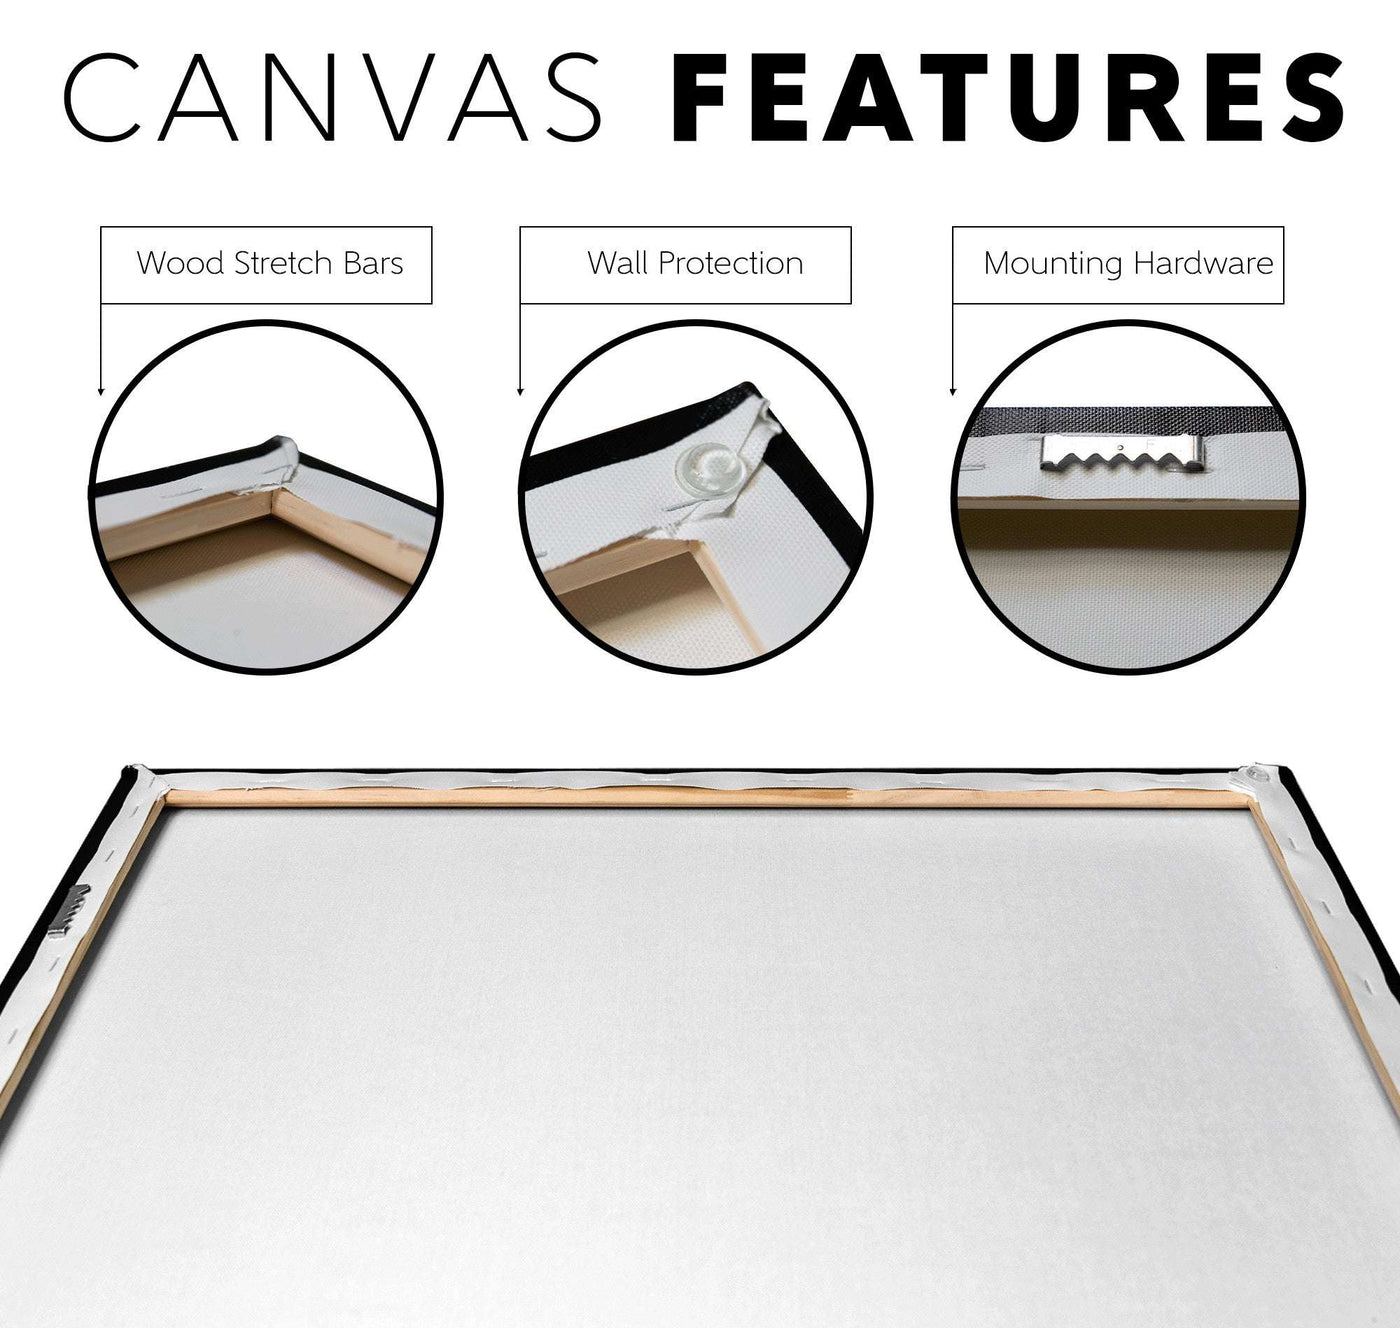 Illustration showing features of a Canvas Art Print: wood stretch bars, wall protection, and mounting hardware, each demonstrated with close-up images and labels.